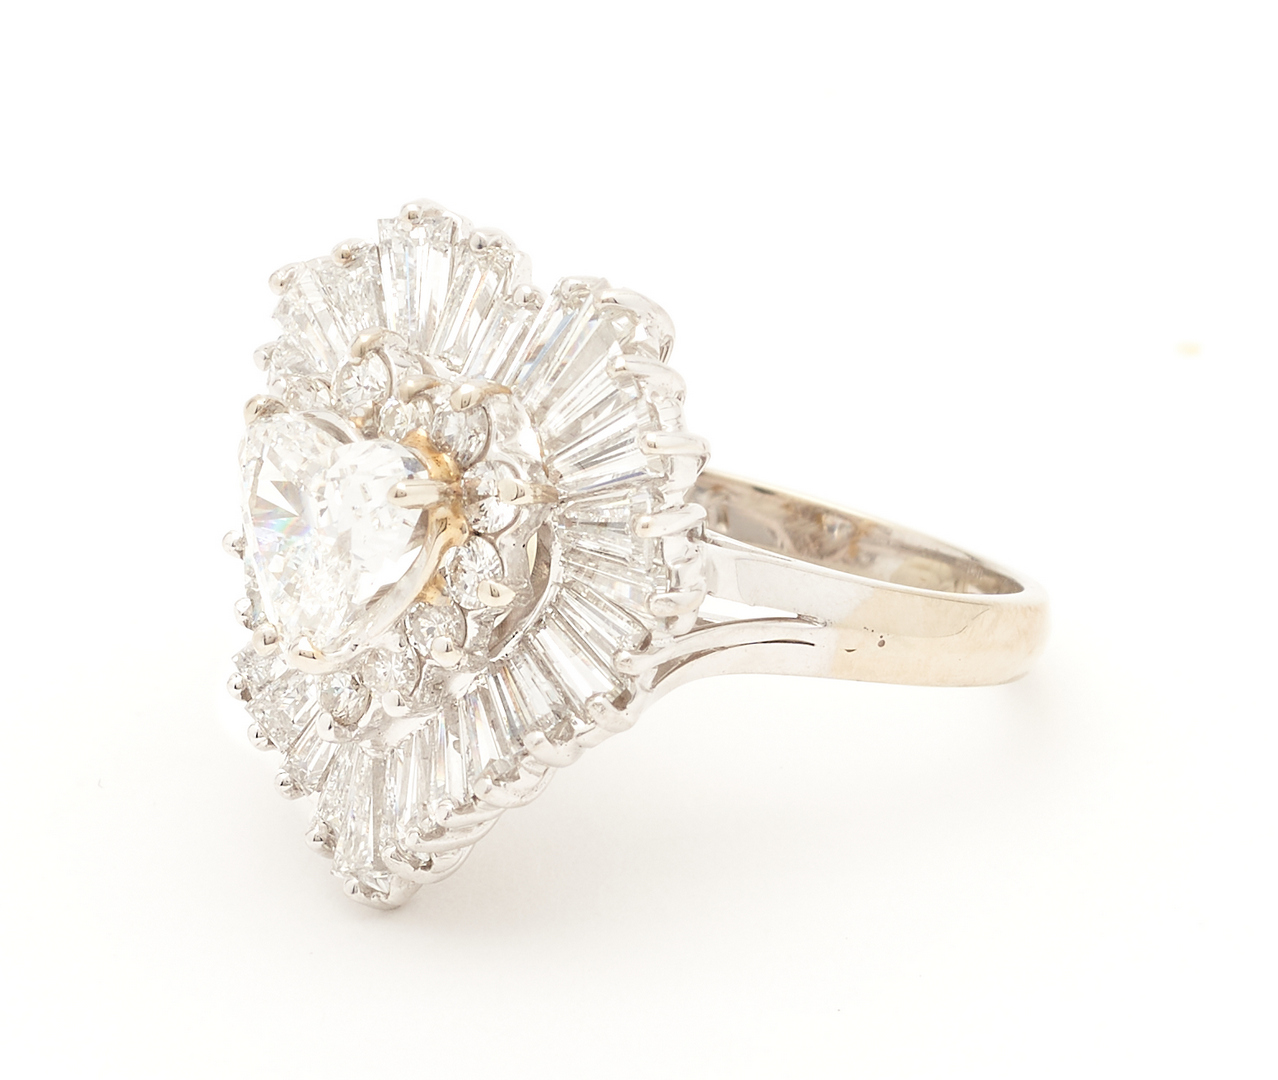 Lot 382: Heart Shaped Diamond Cocktail Ring